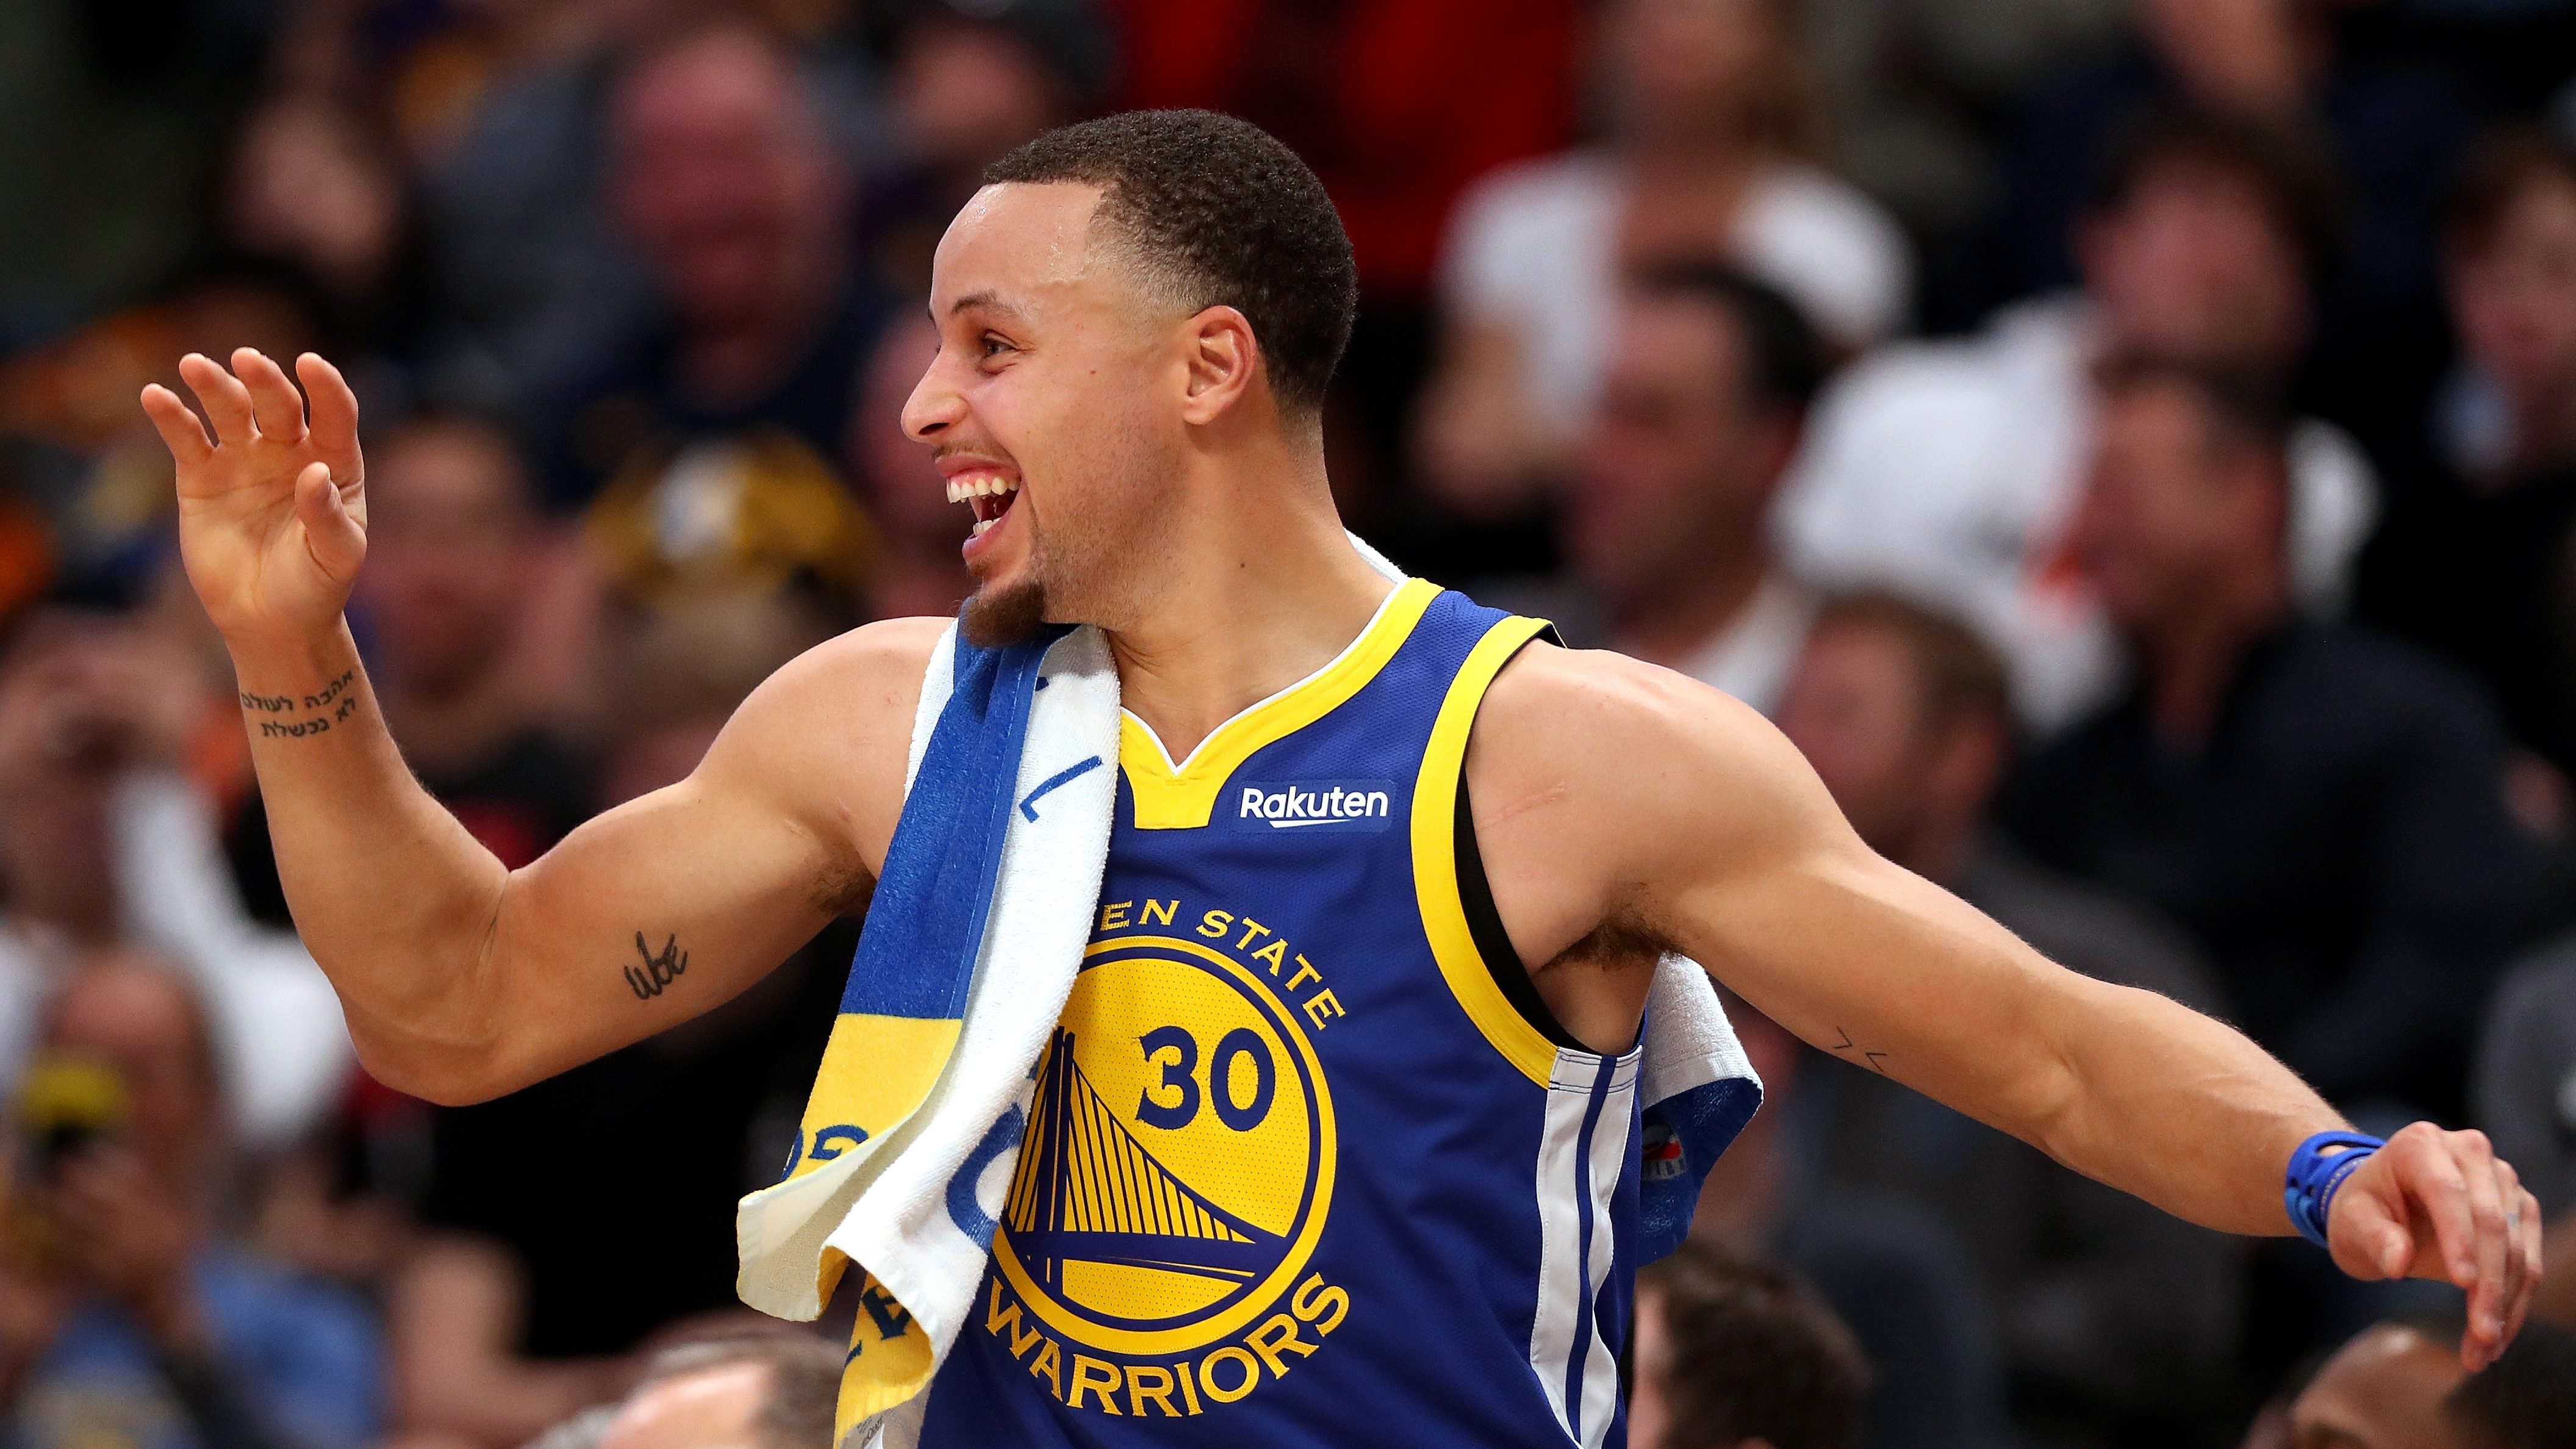 Stephen Curry's Tattoos: What Do They Mean?